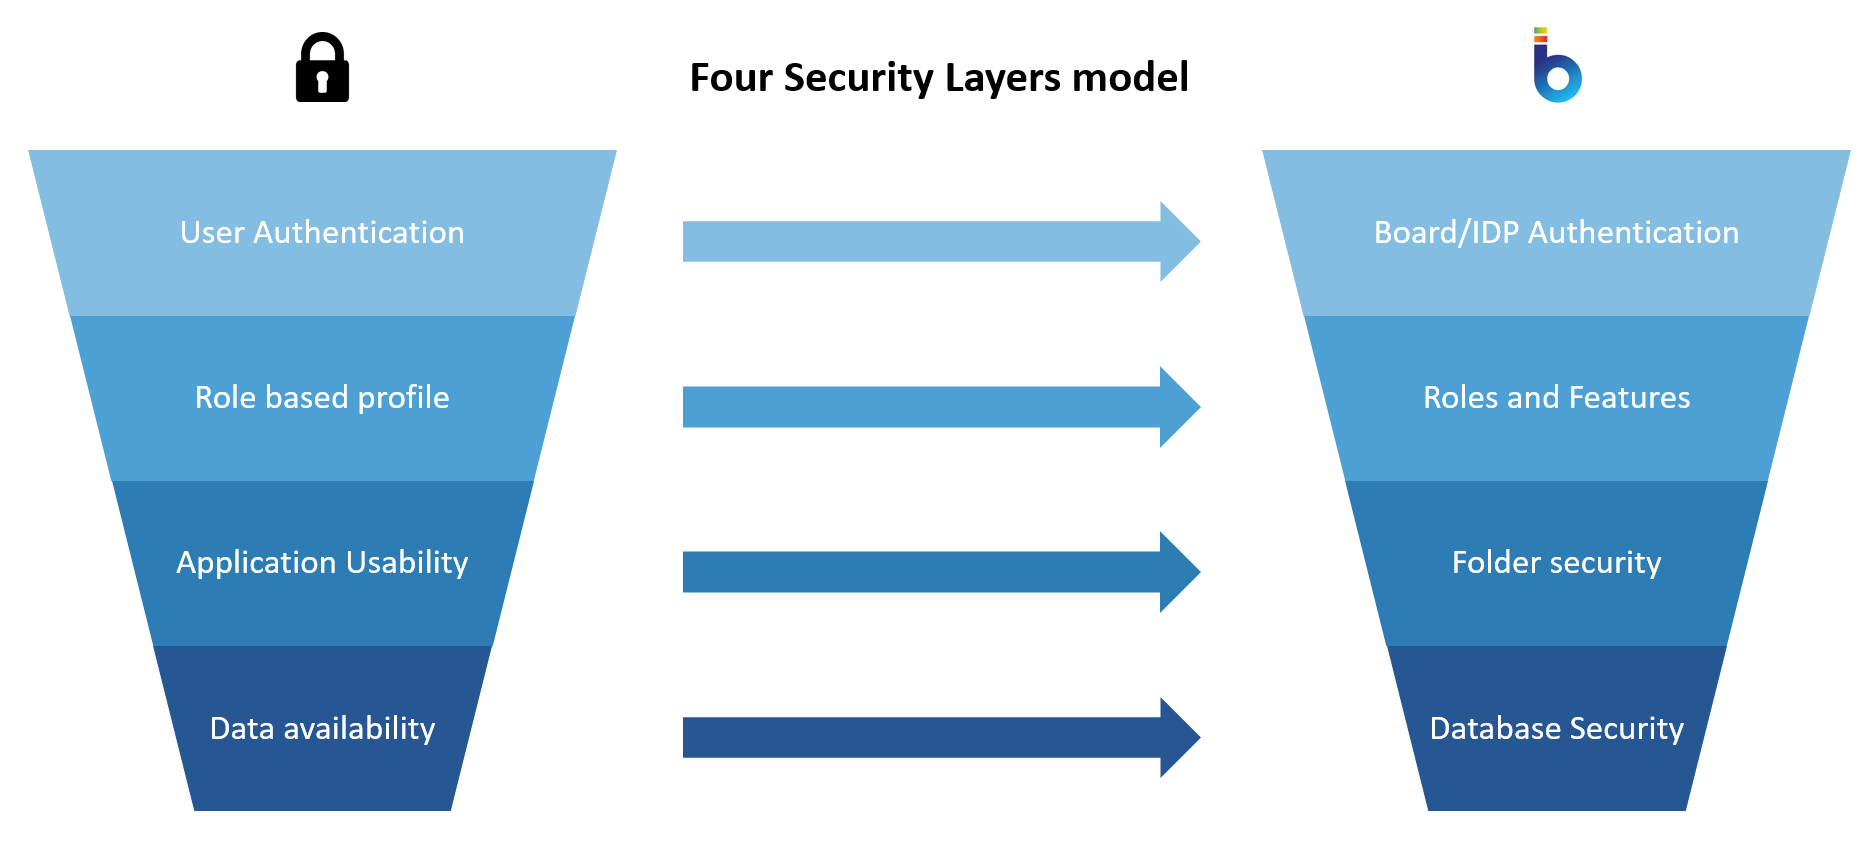 contents/assets/images/assets/images/FOUR_LAYERS_OF_SECURITY.png